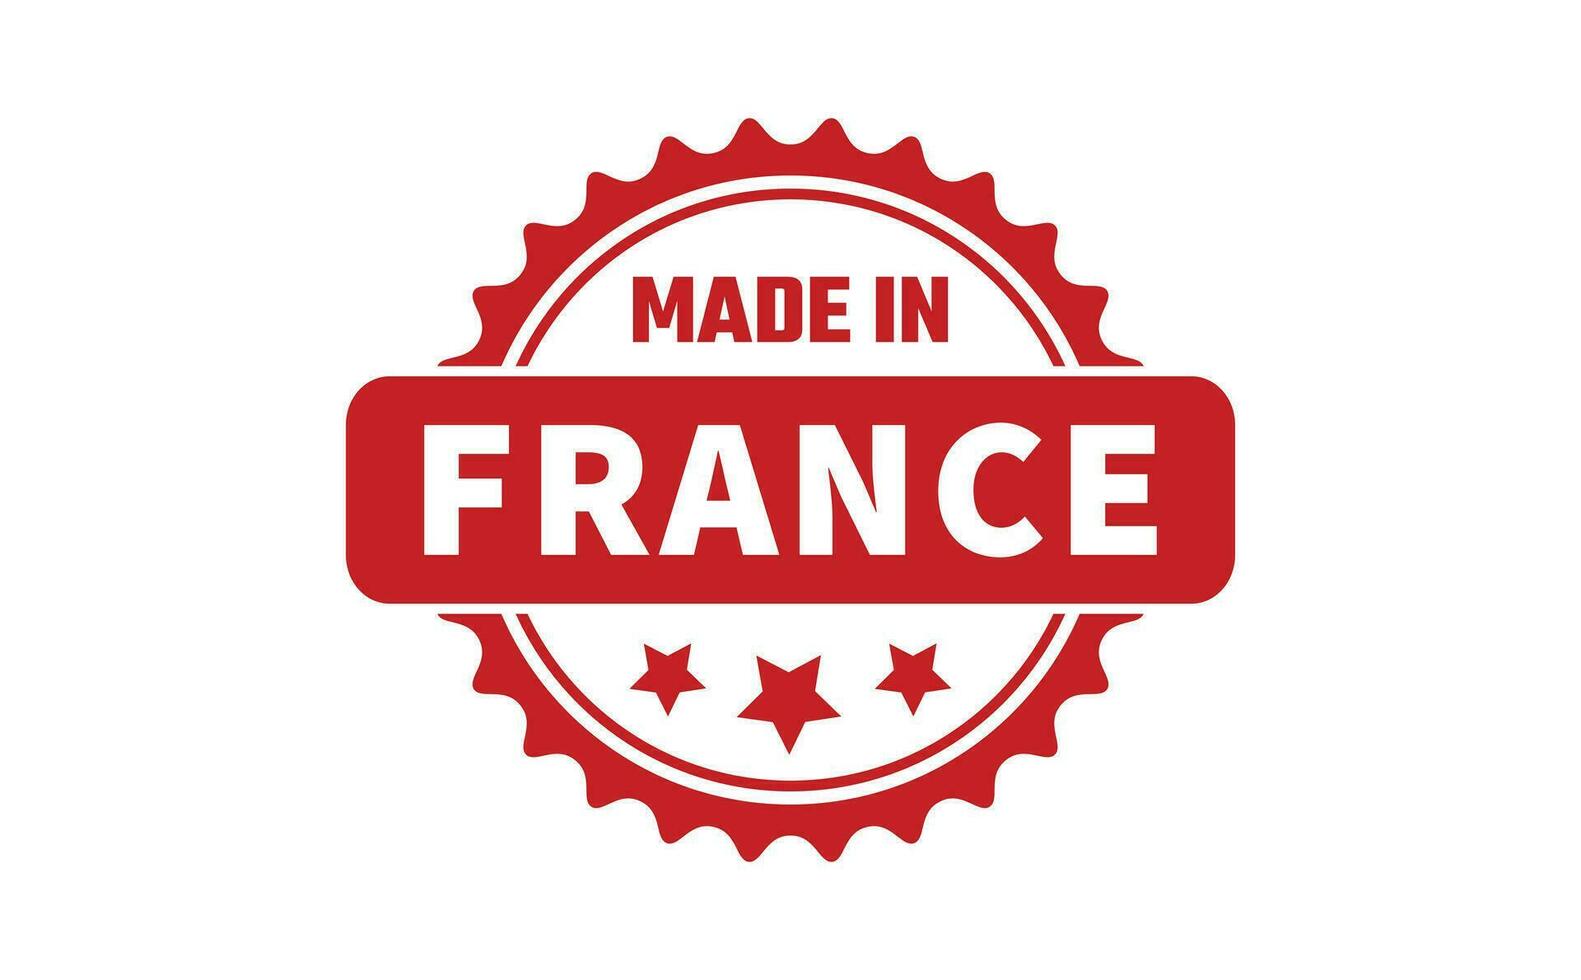 Made In France Rubber Stamp vector